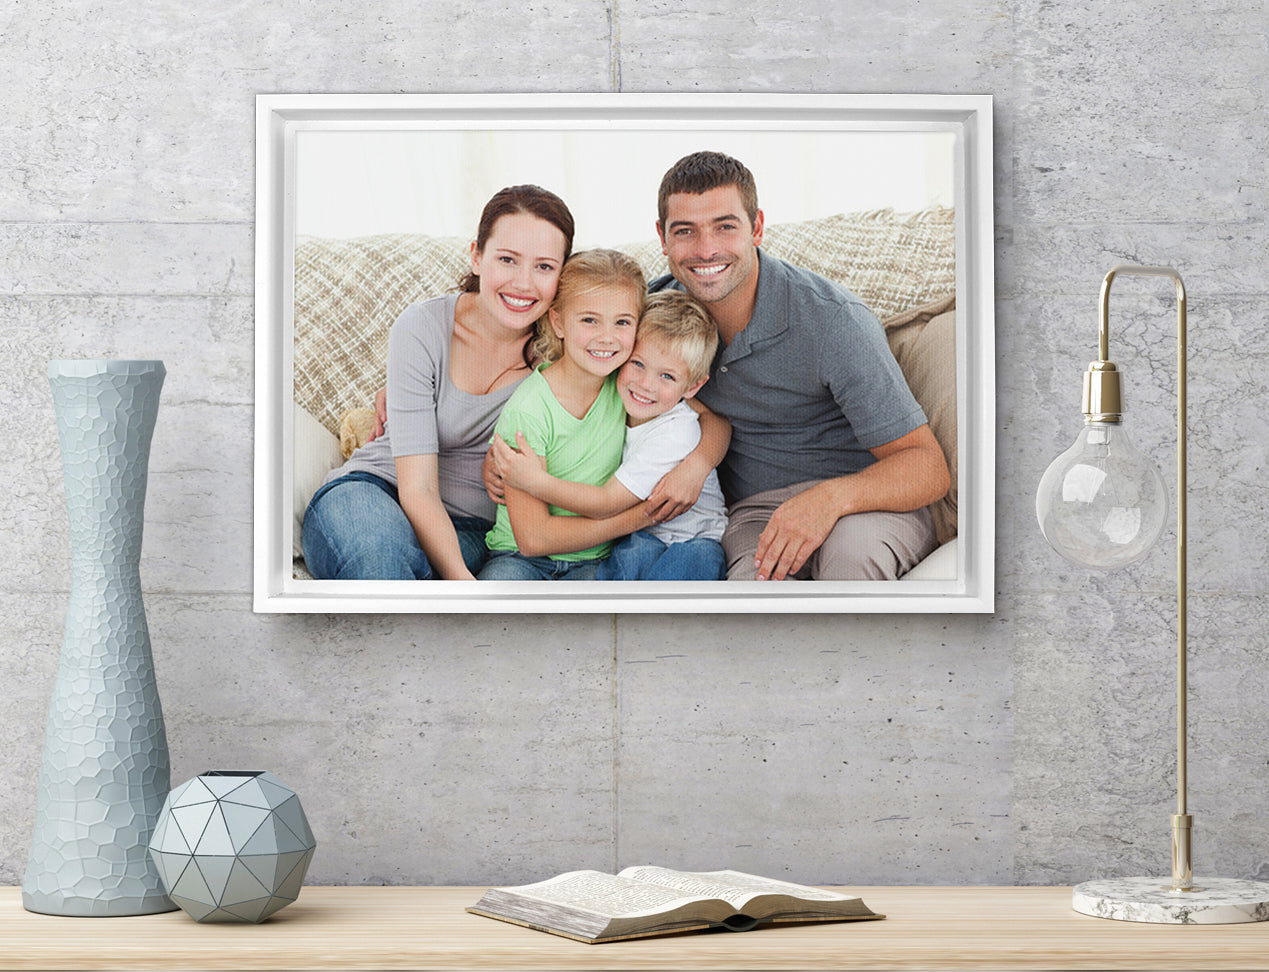 Framed Canvas Prints - white Frame - personalised with family photo